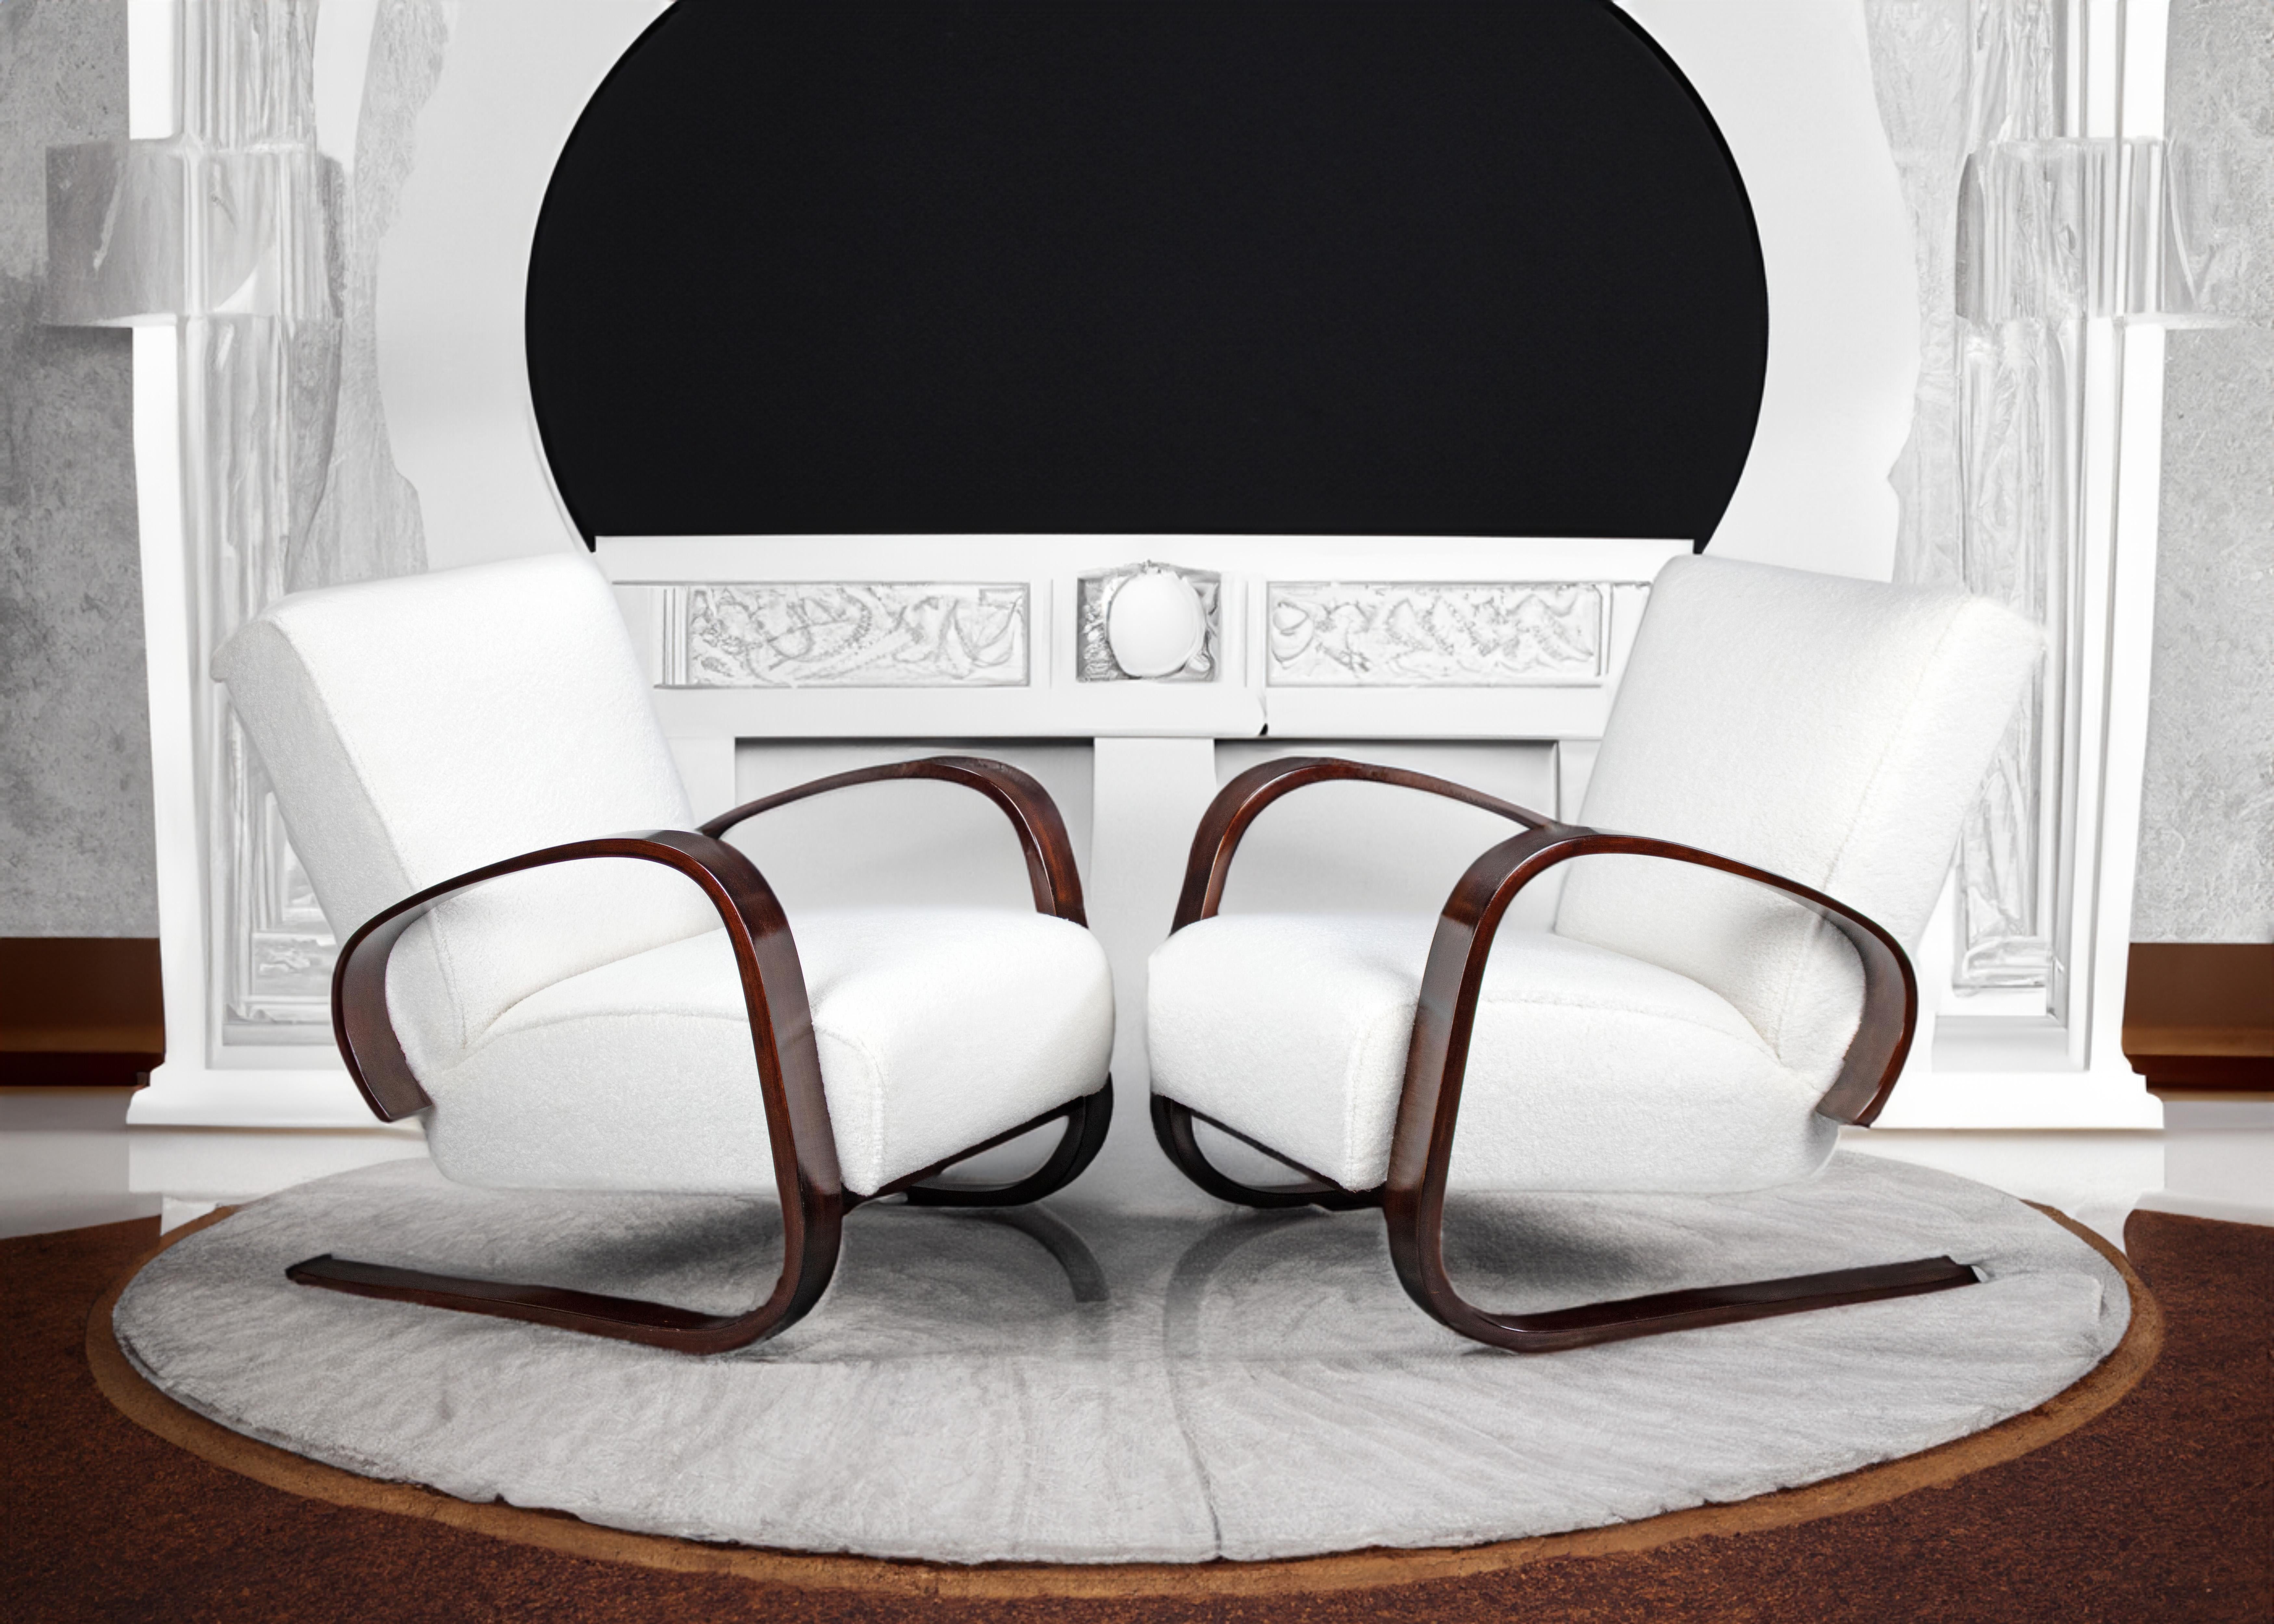 This beautiful pair of Art Deco armchairs was designed by Miroslav Navratil. He was inspired by the Tank of Alvar Aalto, we can consider these armchairs as a tribute to him. The armchairs provide excellent and comfortable seating. The armchairs were